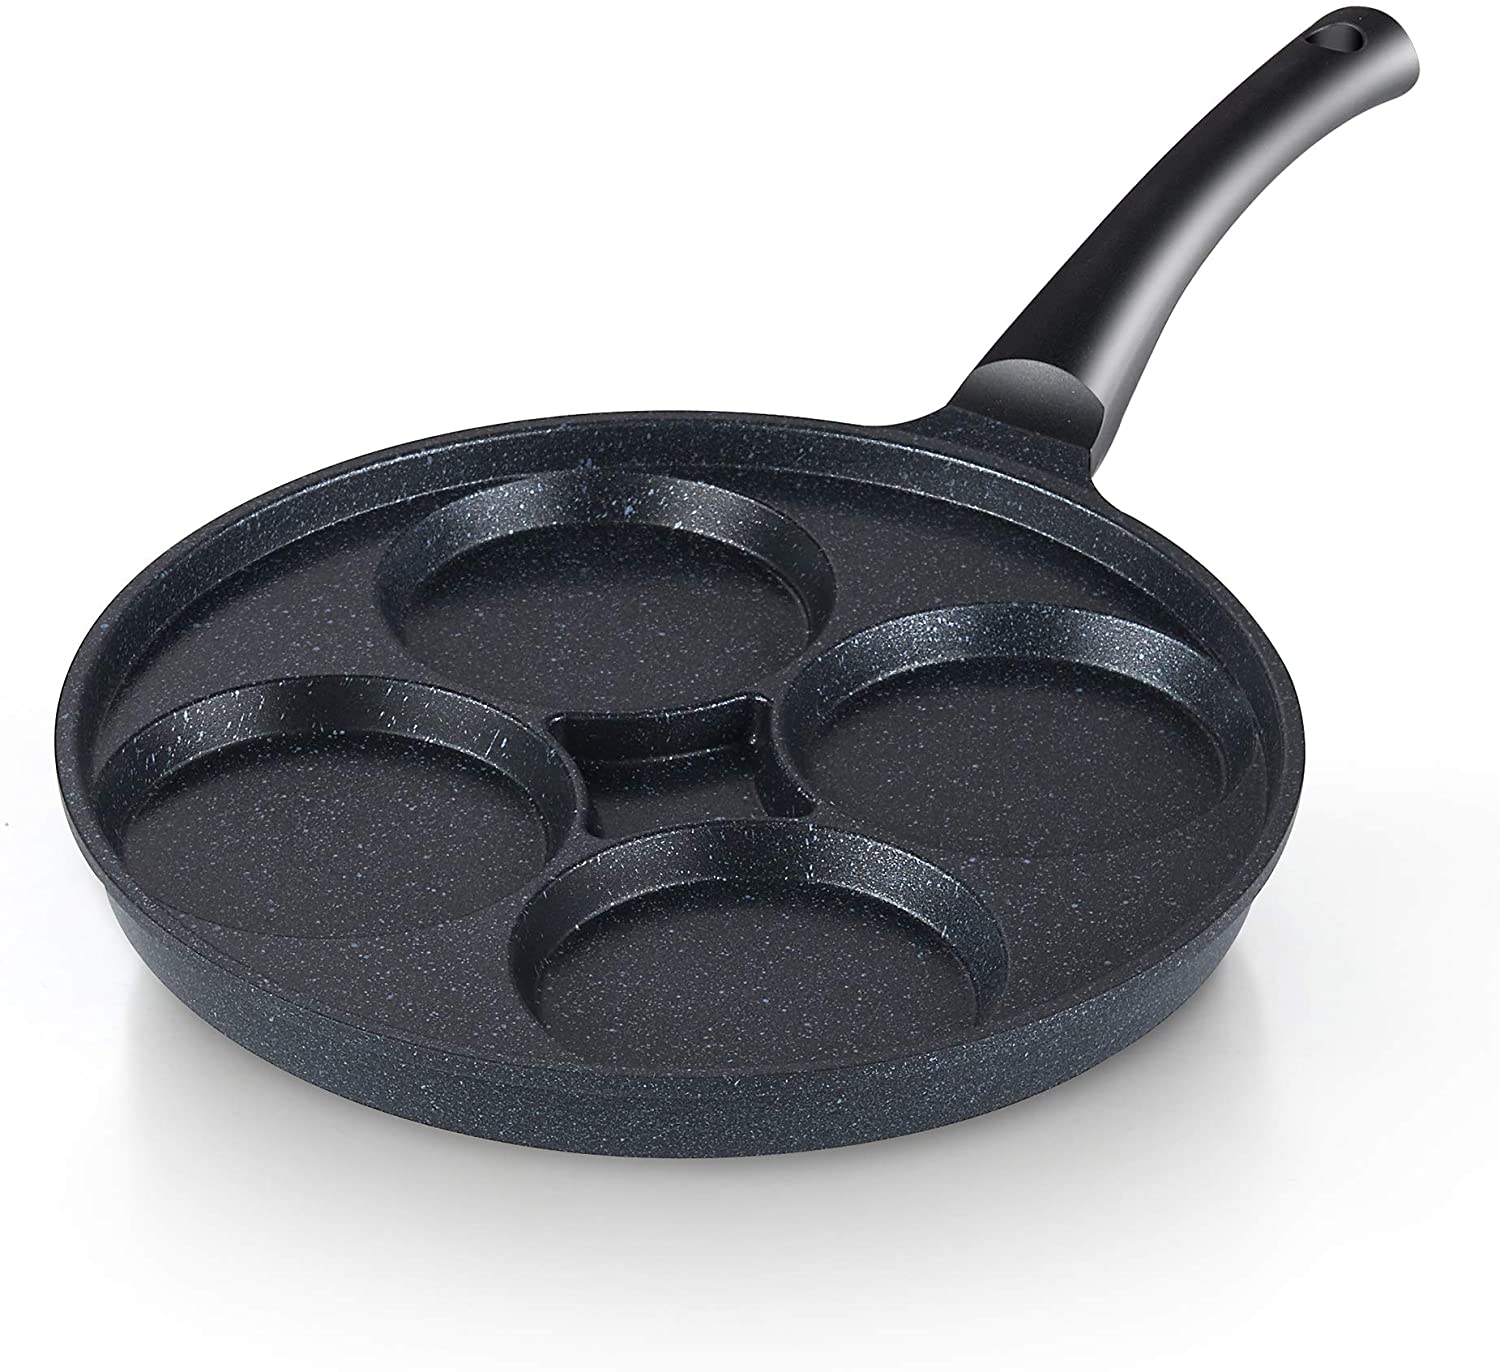 Cook N Home Marble Nonstick cookware Saute Fry Pan, 11 4 Cup Egg Made